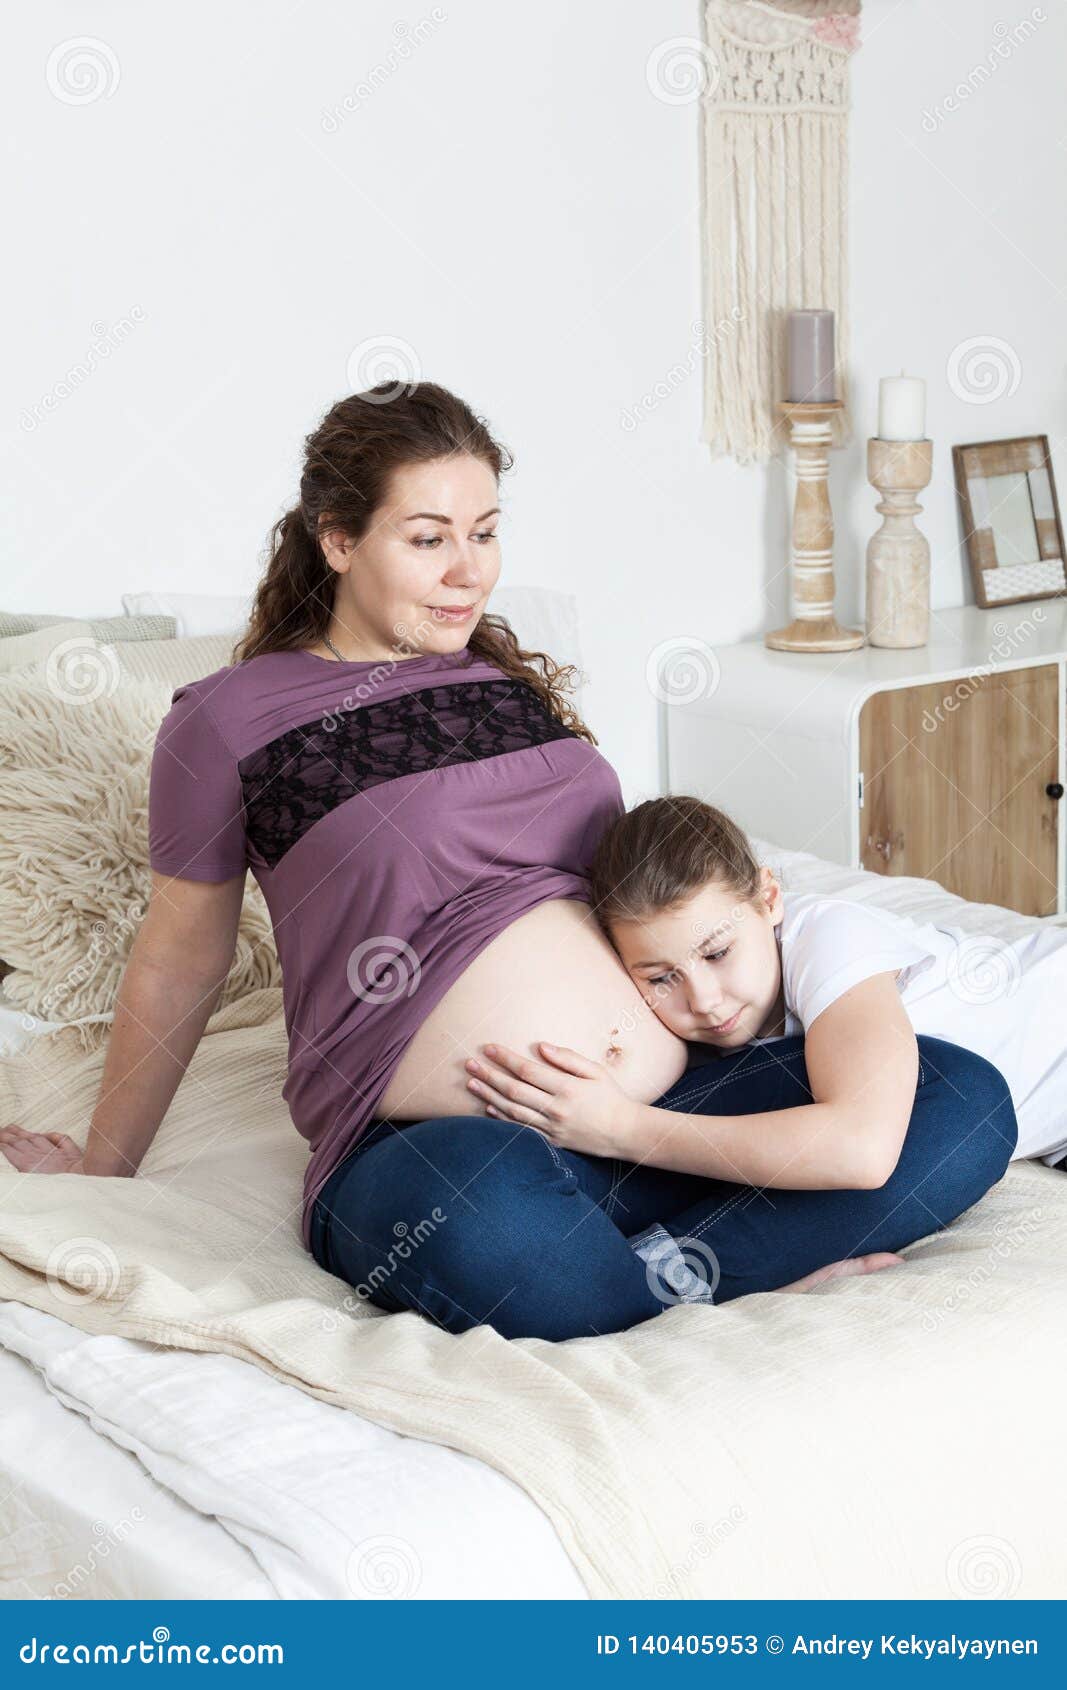 Pregnant Nude Teens